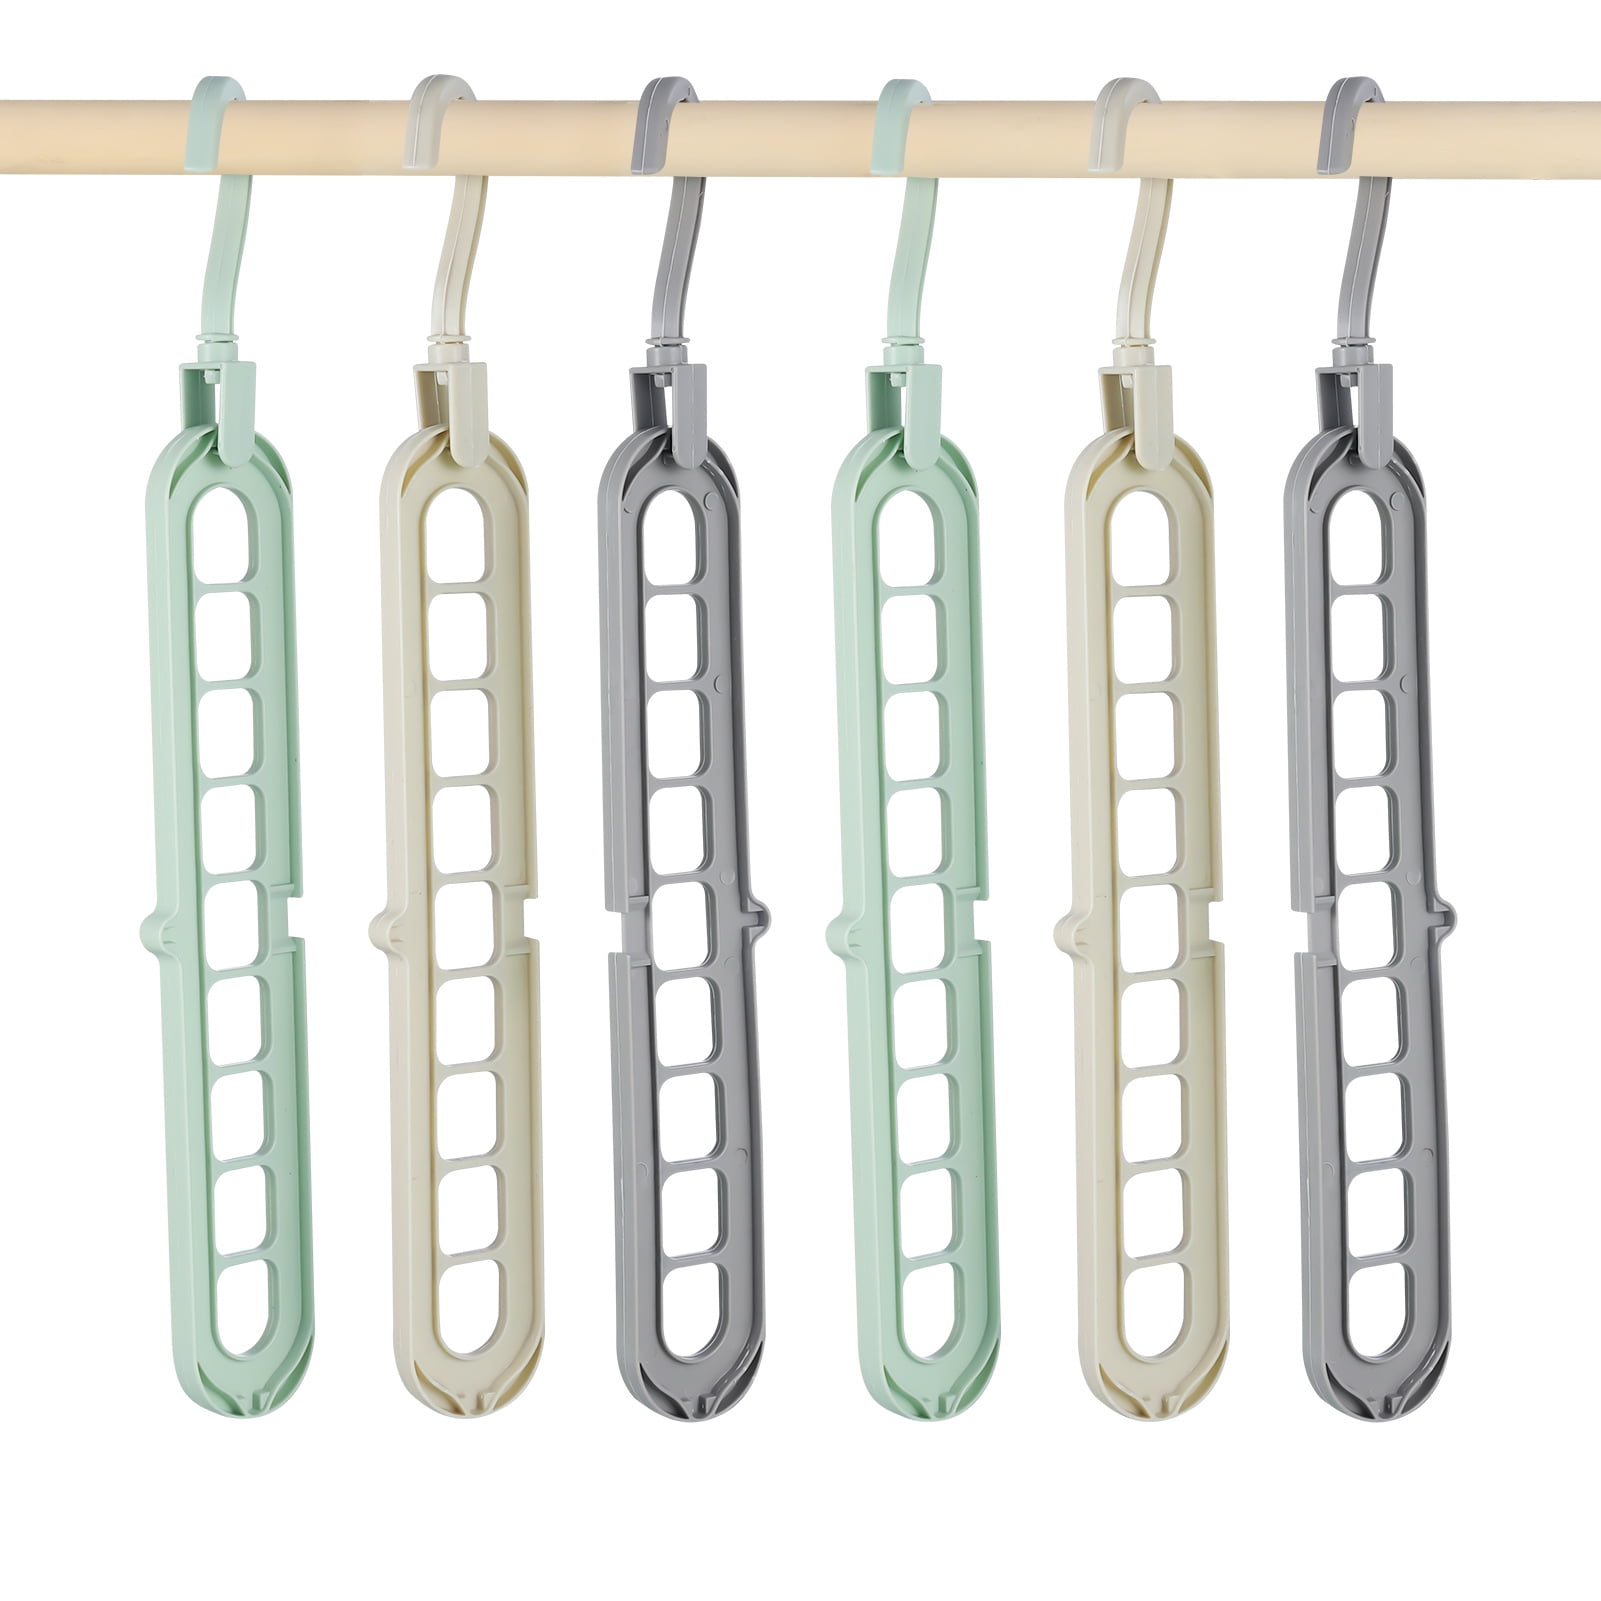 Smartor Space Saving Hangers - Plastic, 20 Pack Magic Hangers, Closet  Organizers and Storage for Clothes Organizer, Hanger Organizer, Closet  Hangers